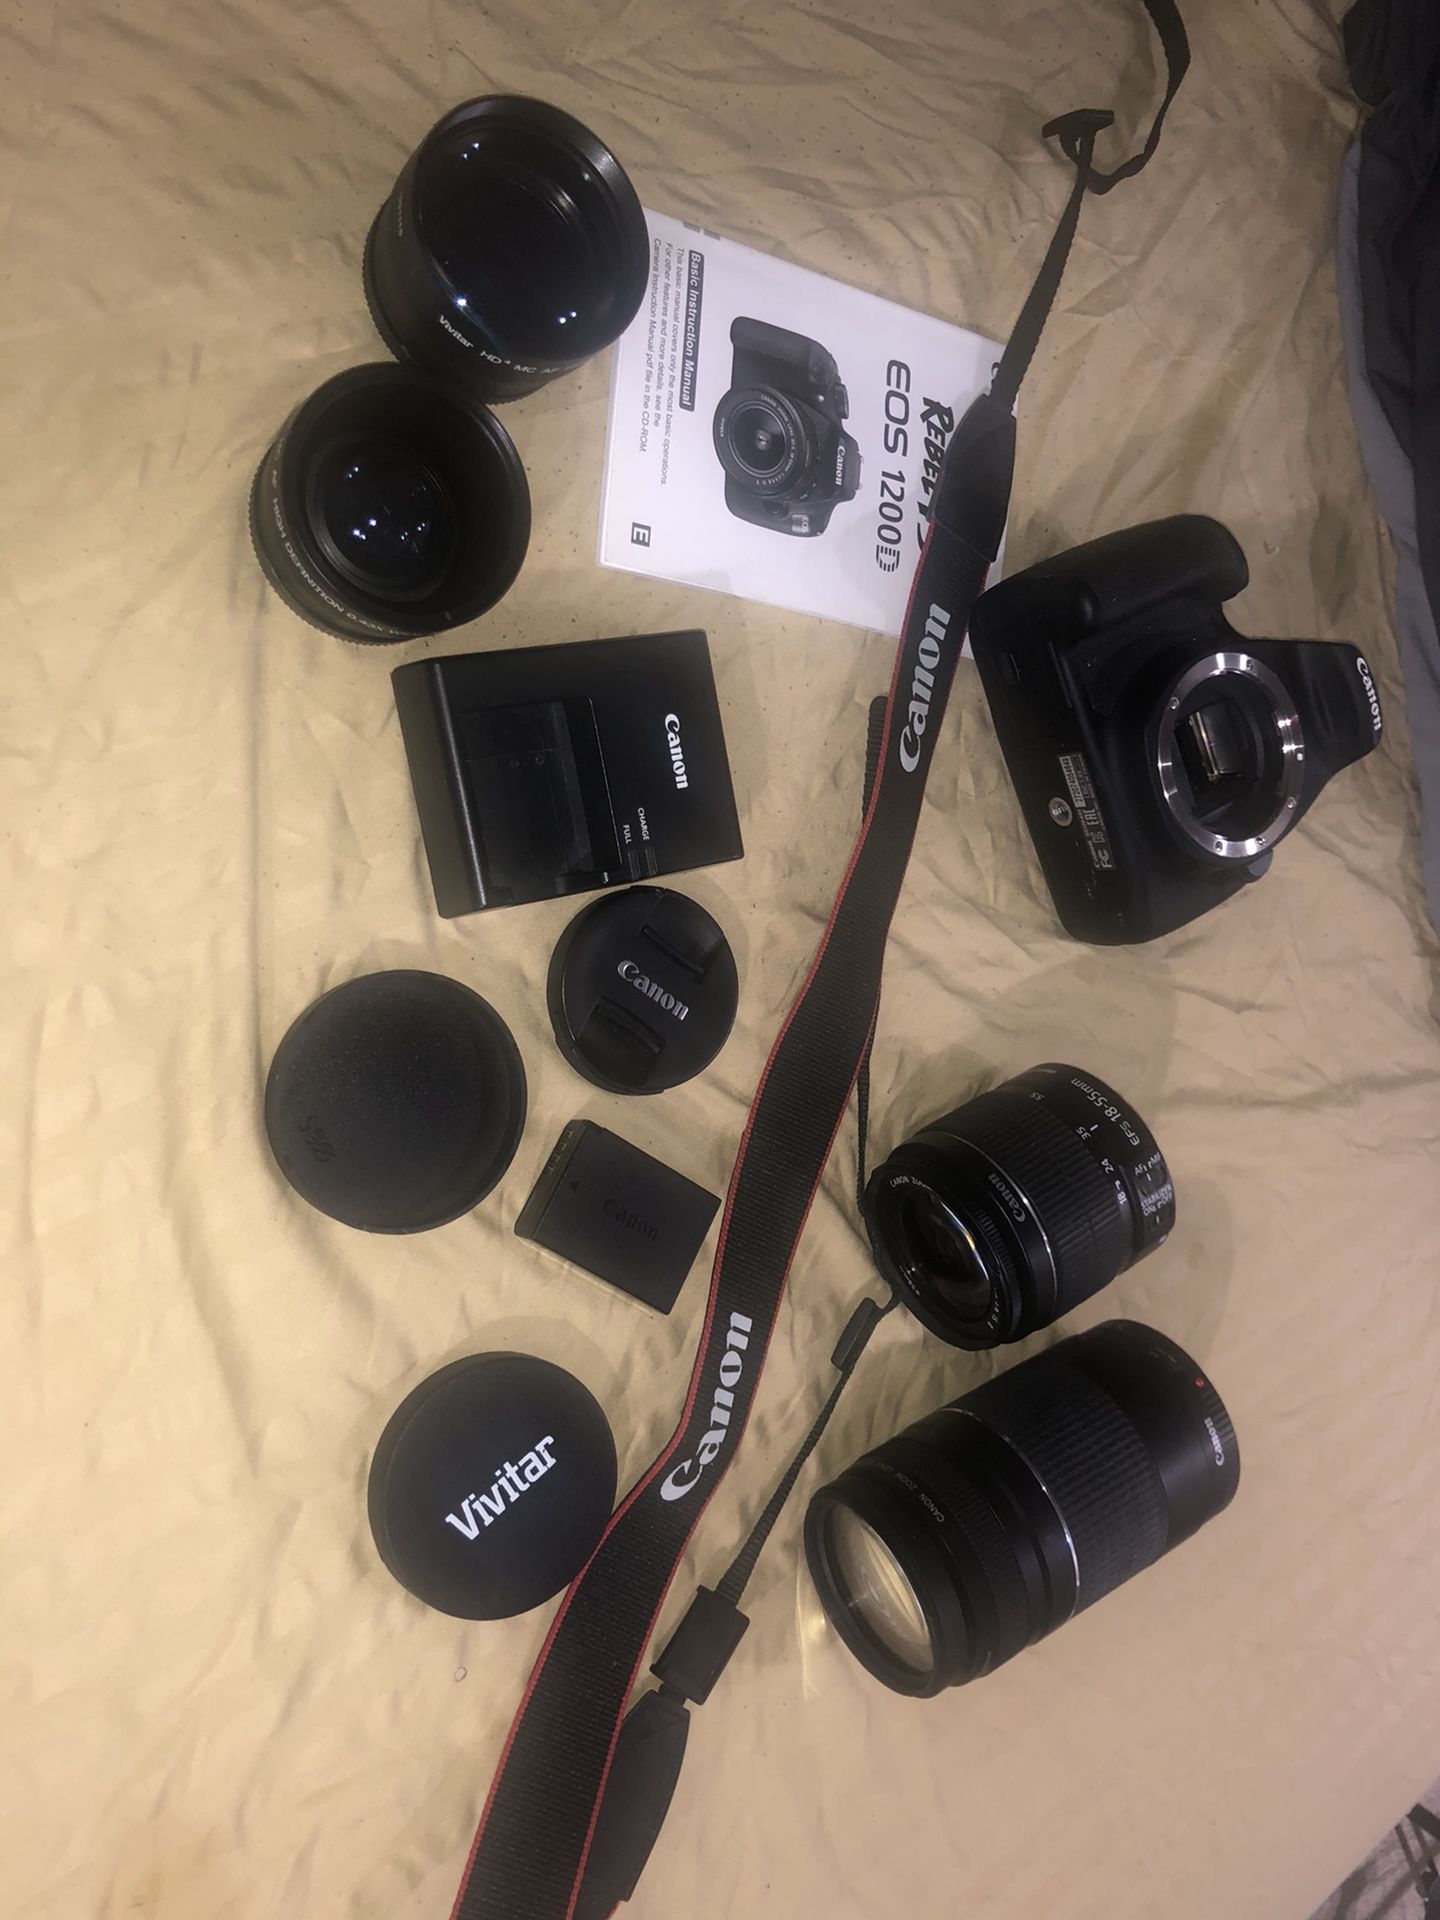 Canon Rebel T5 w two lenses(18-55mm and 75-300mm) and other accessories